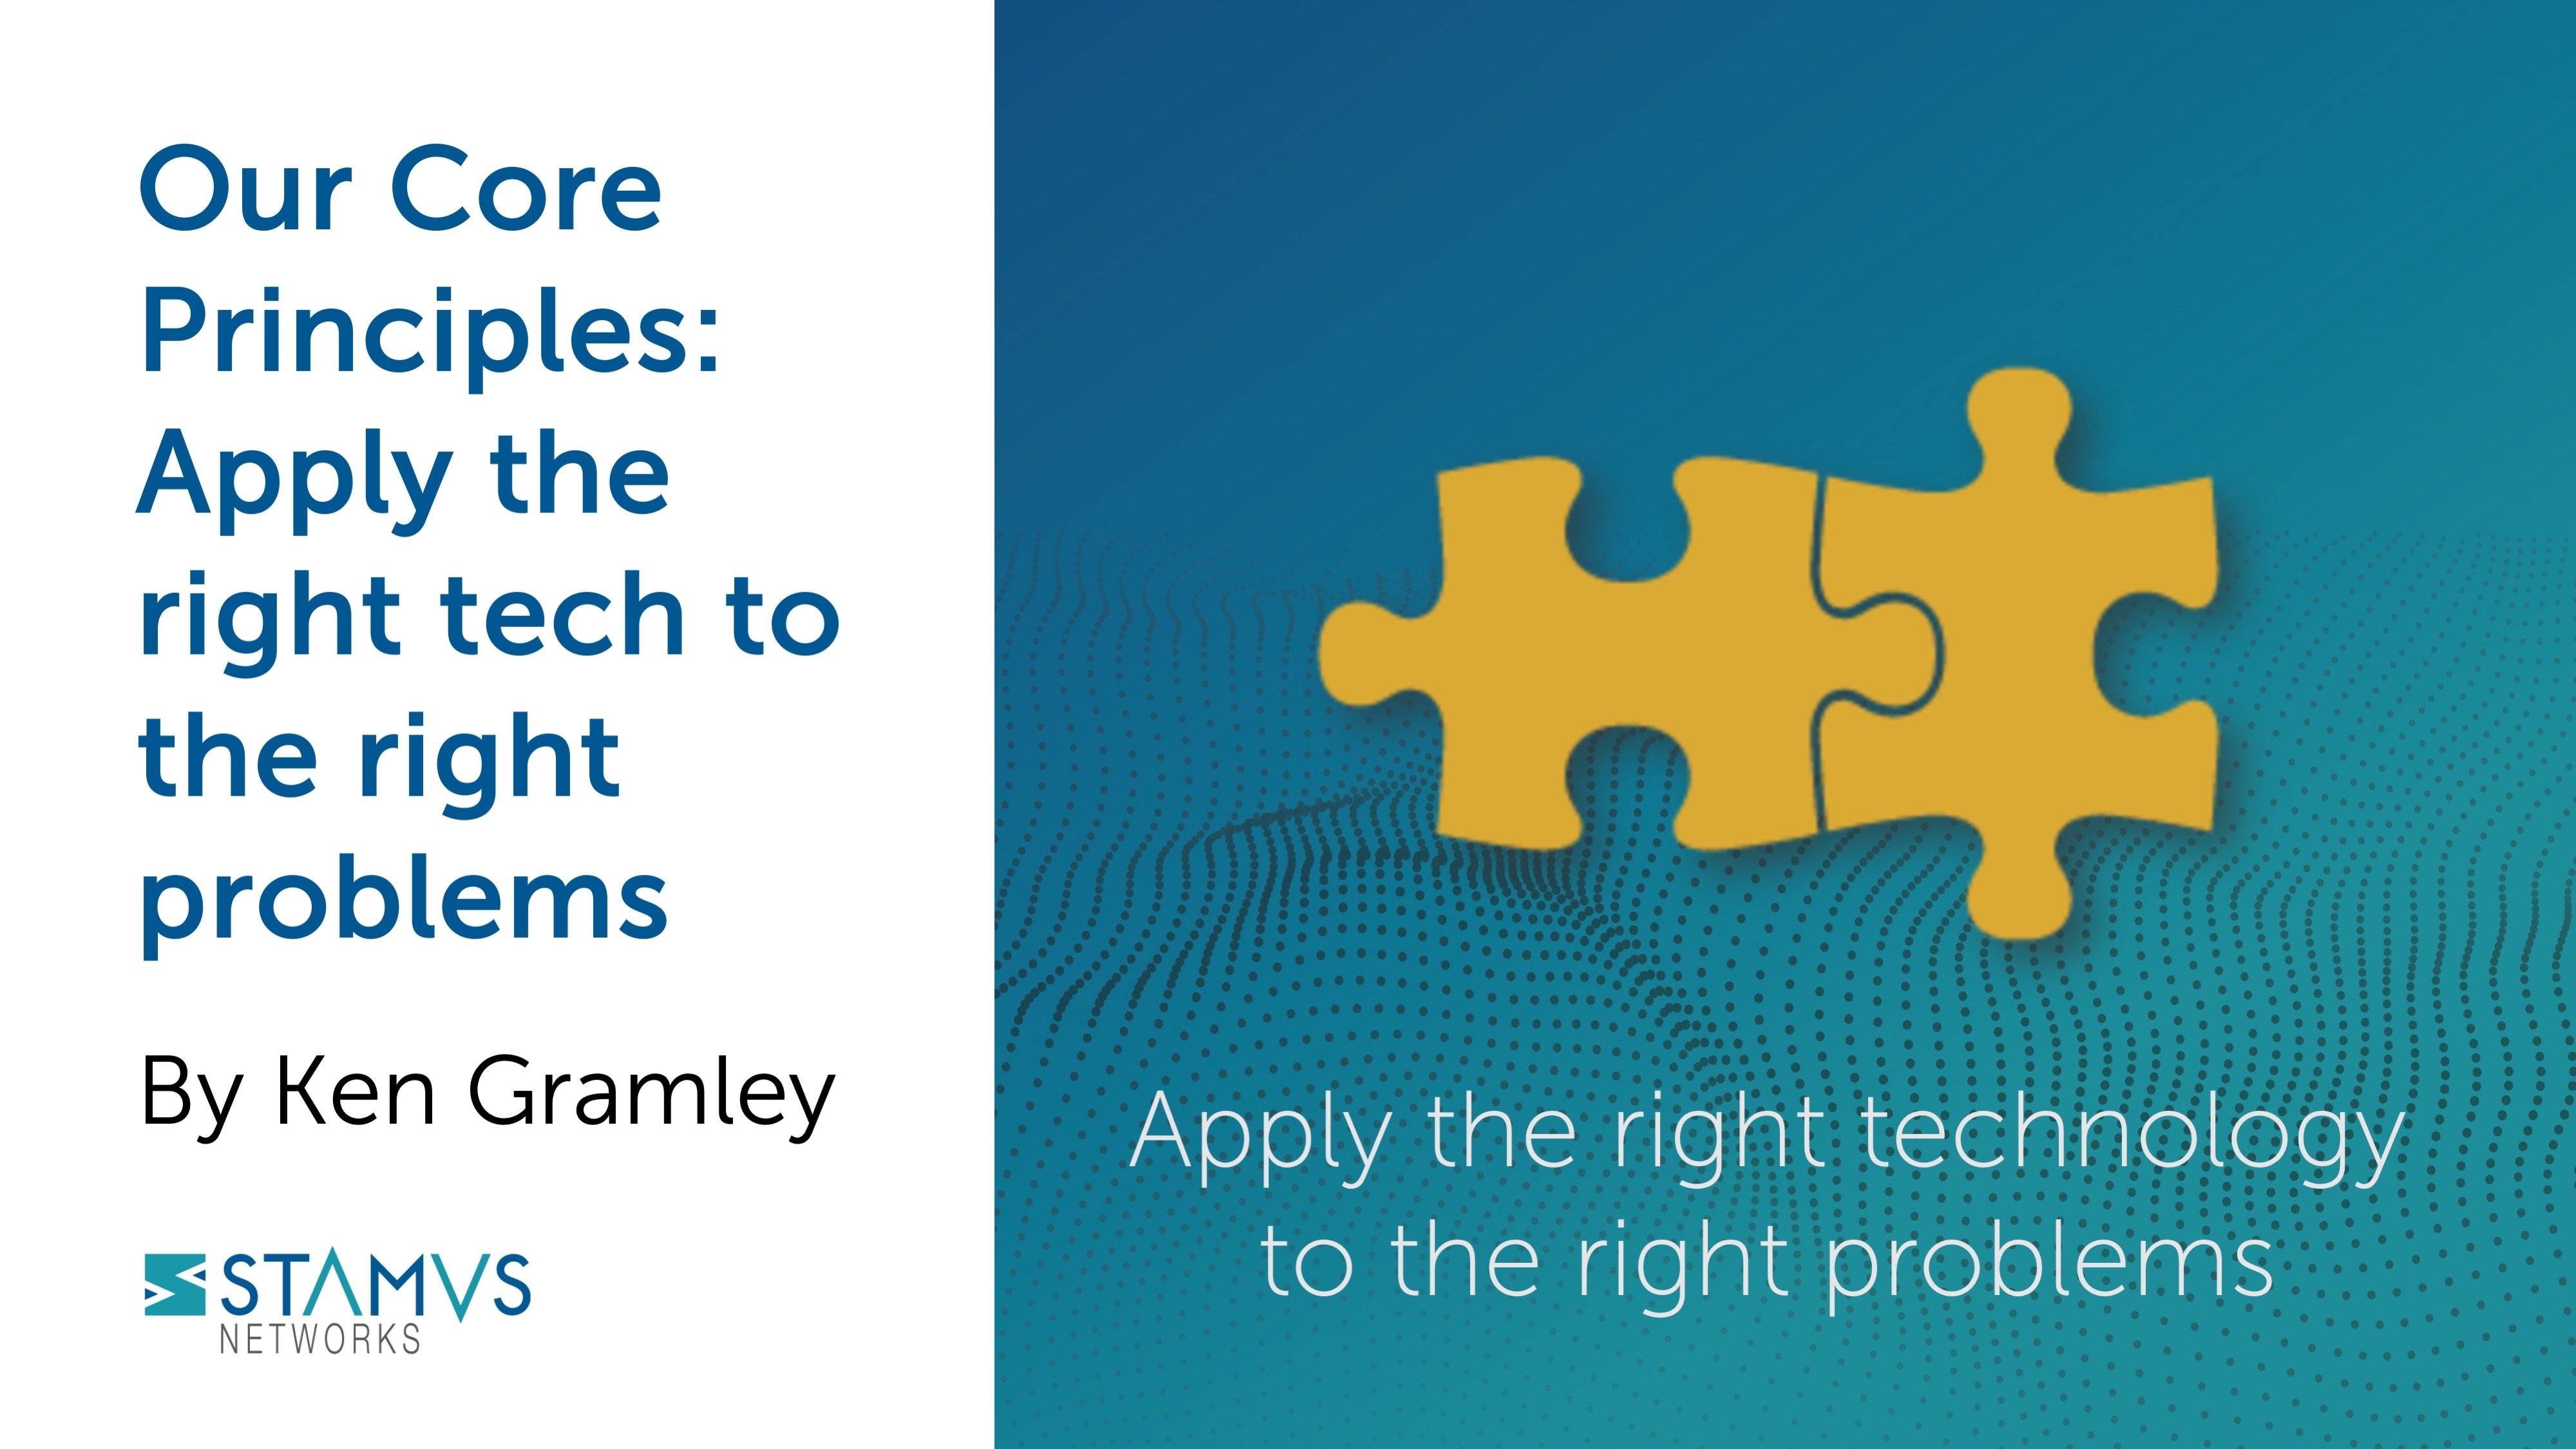 IMAGE: Apply the right technology to the right problems